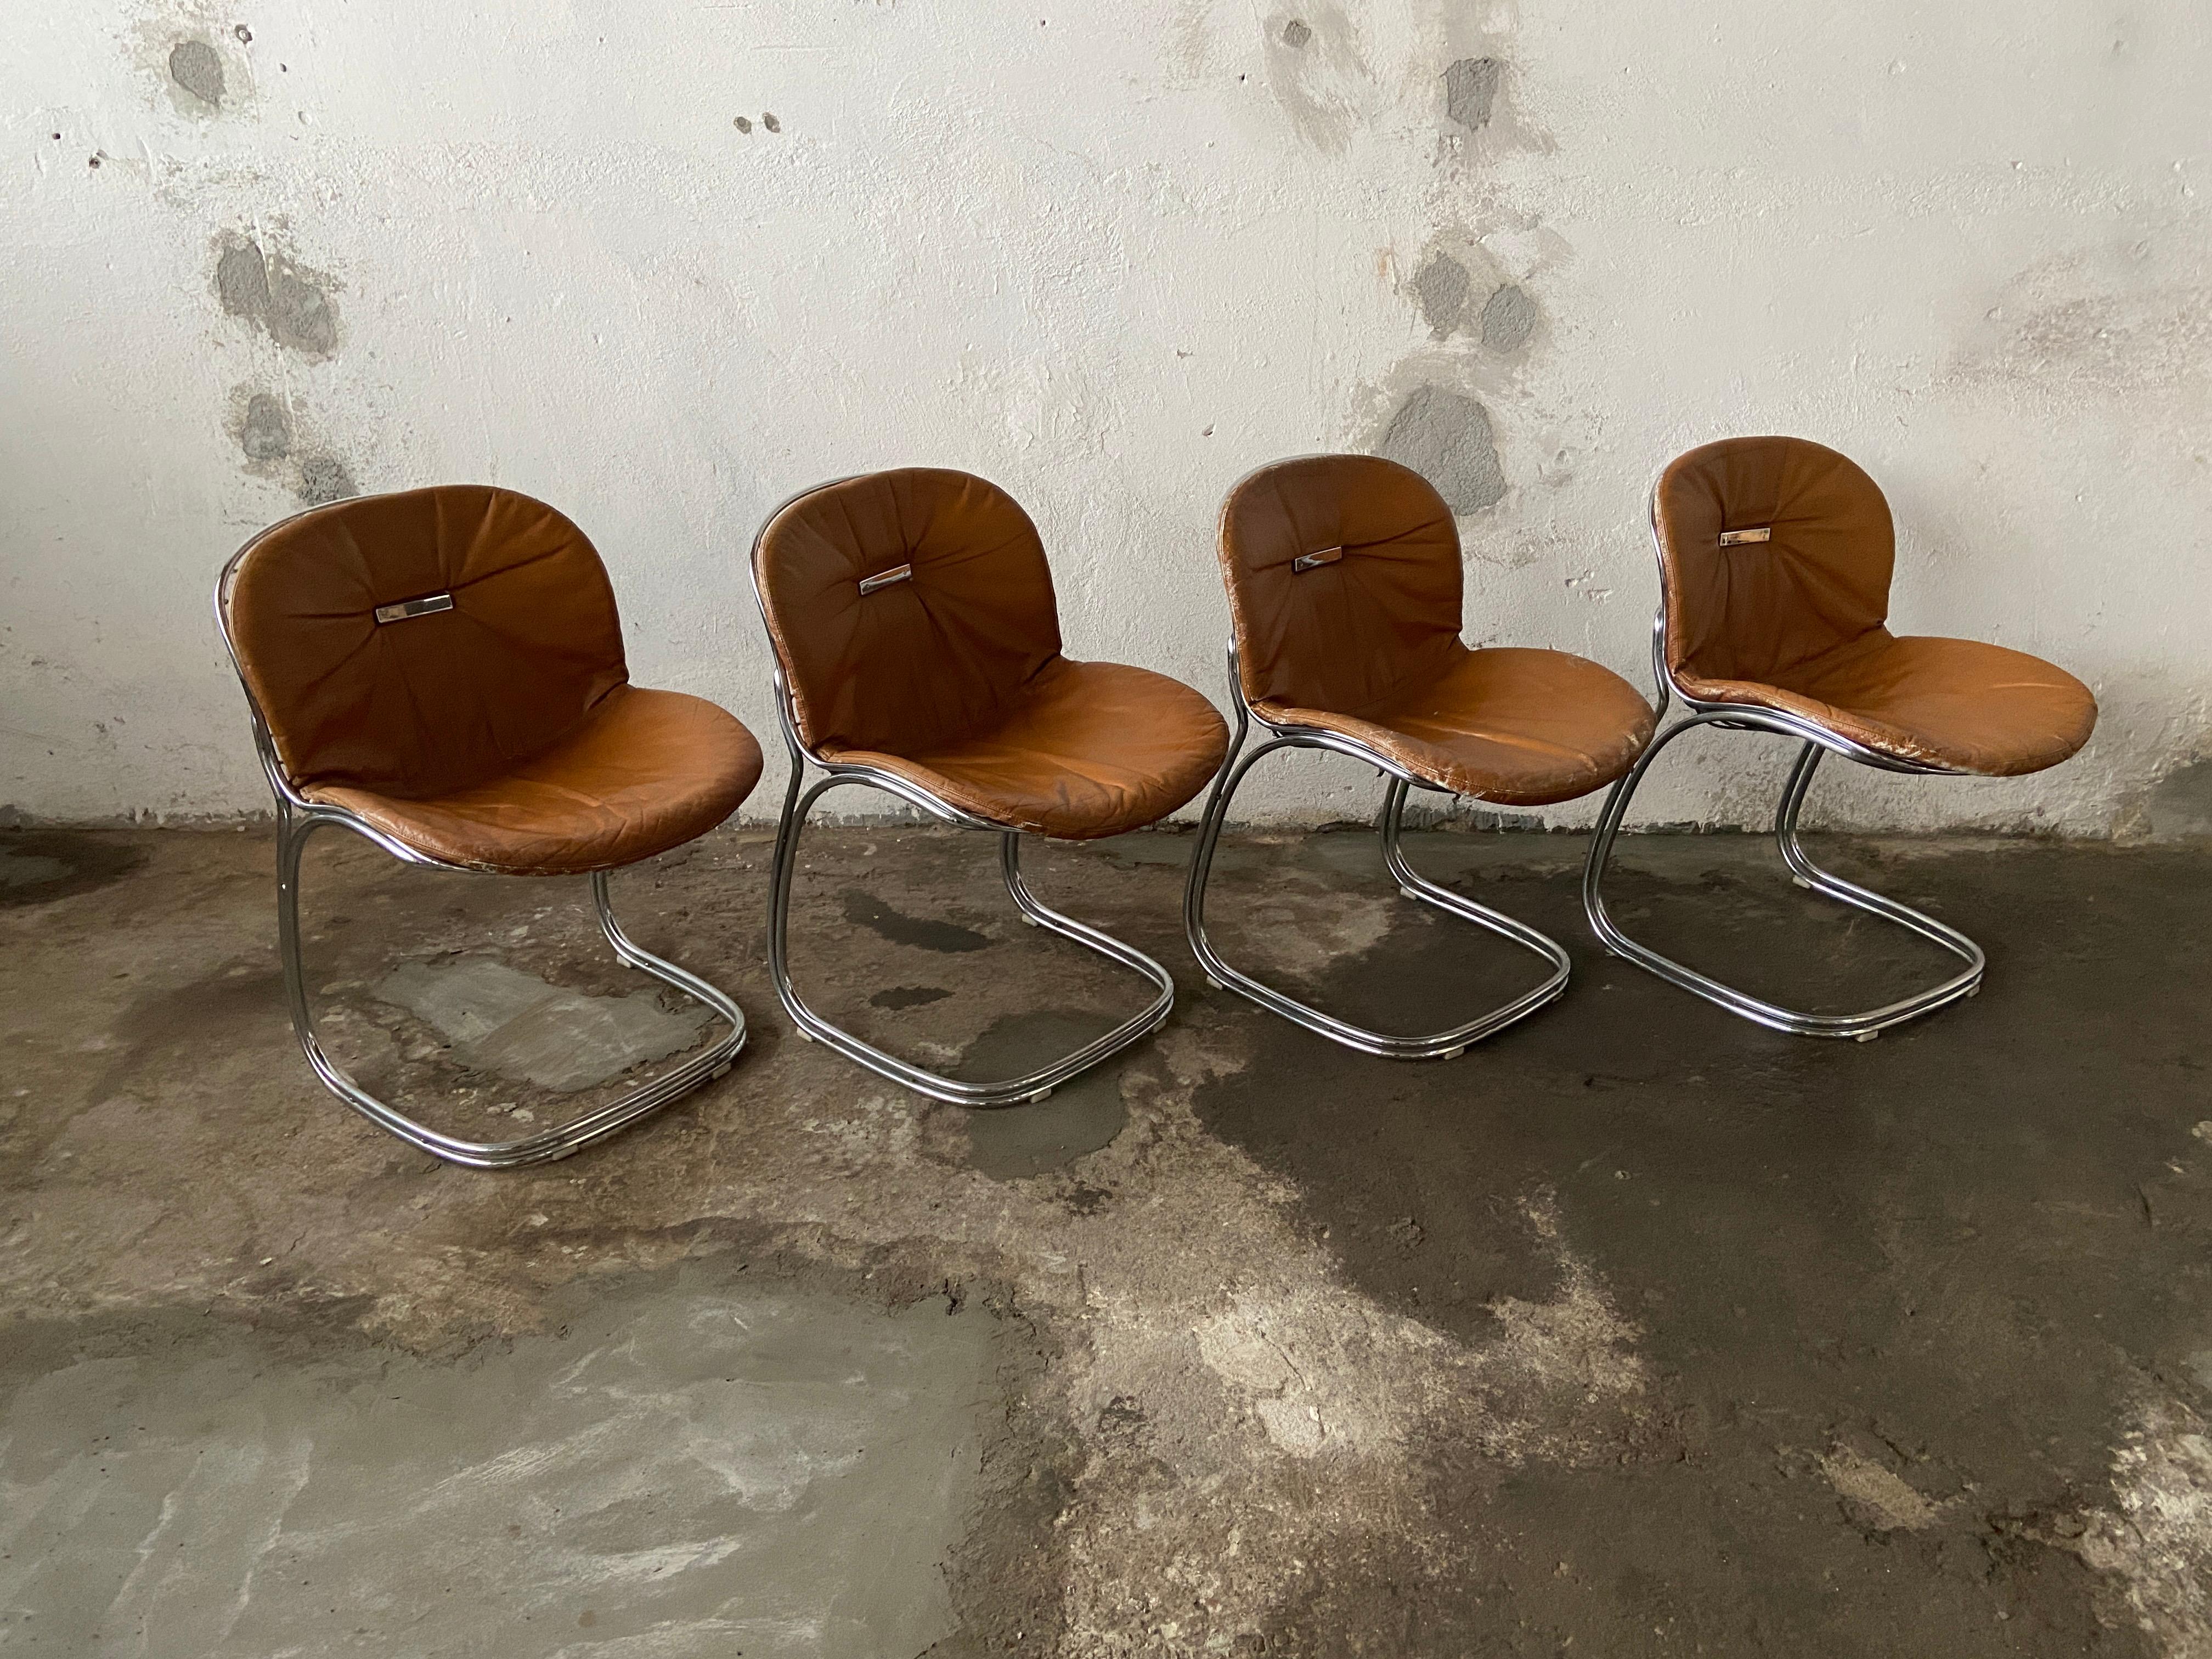 Mid-Century Modern Italian set of 4 Gastone Rinaldi cantilevered chrome and leather chairs 'Sabrina' for RIMA, 1970s
The ware of the leather parts consist with age and use but the general conditions of the chairs are good.